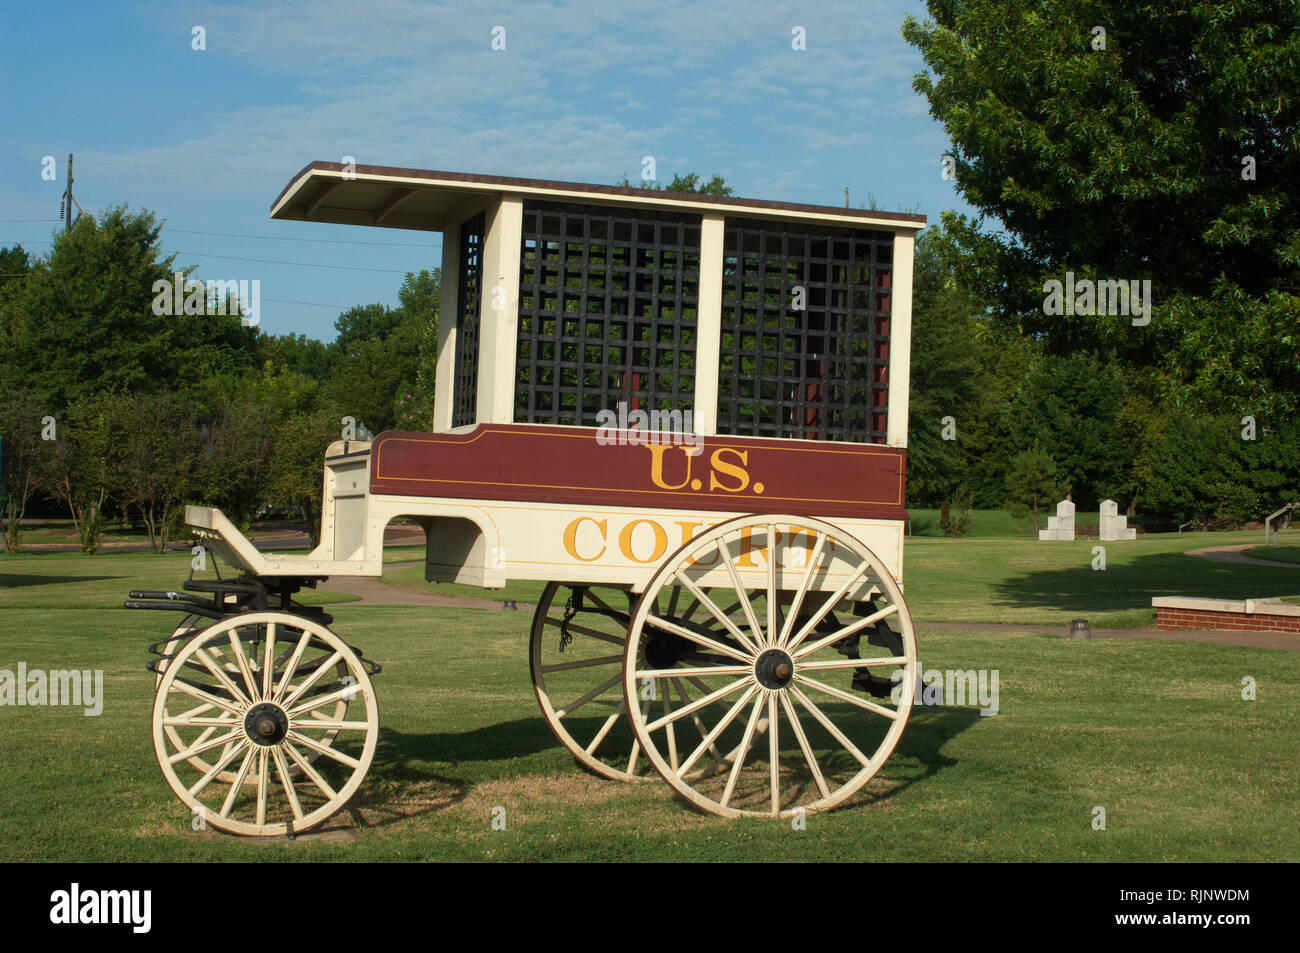 Paddy wagon for carrying prisoners, Fort Smith National Historic Site, Arkansas. Digital photograph Stock Photo